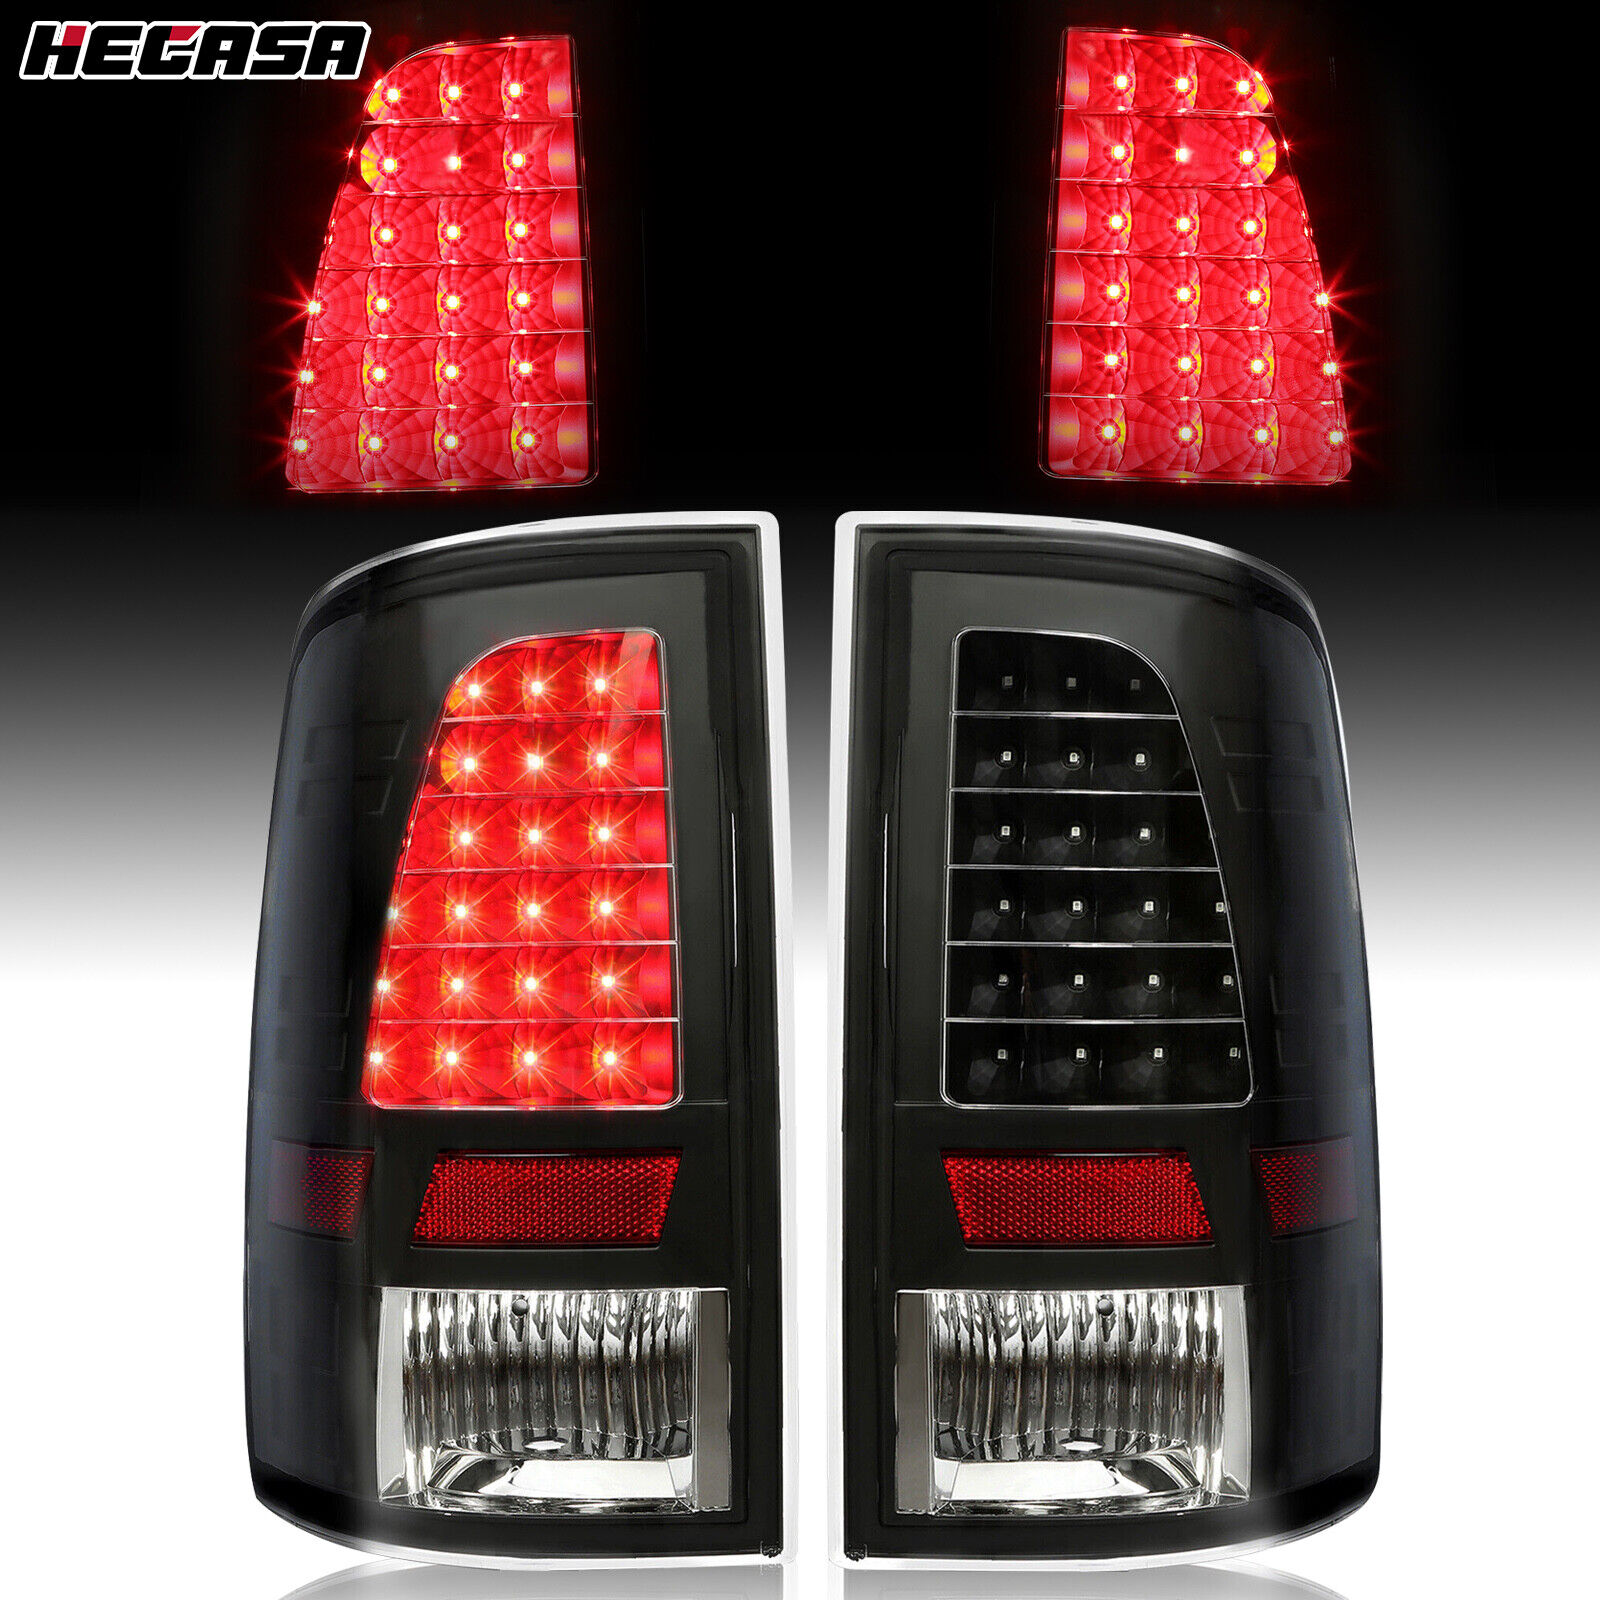 HECASA LED Tail Lights Lamps For 2009-2018 Dodge Ram 1500 2500 3500 Pickup